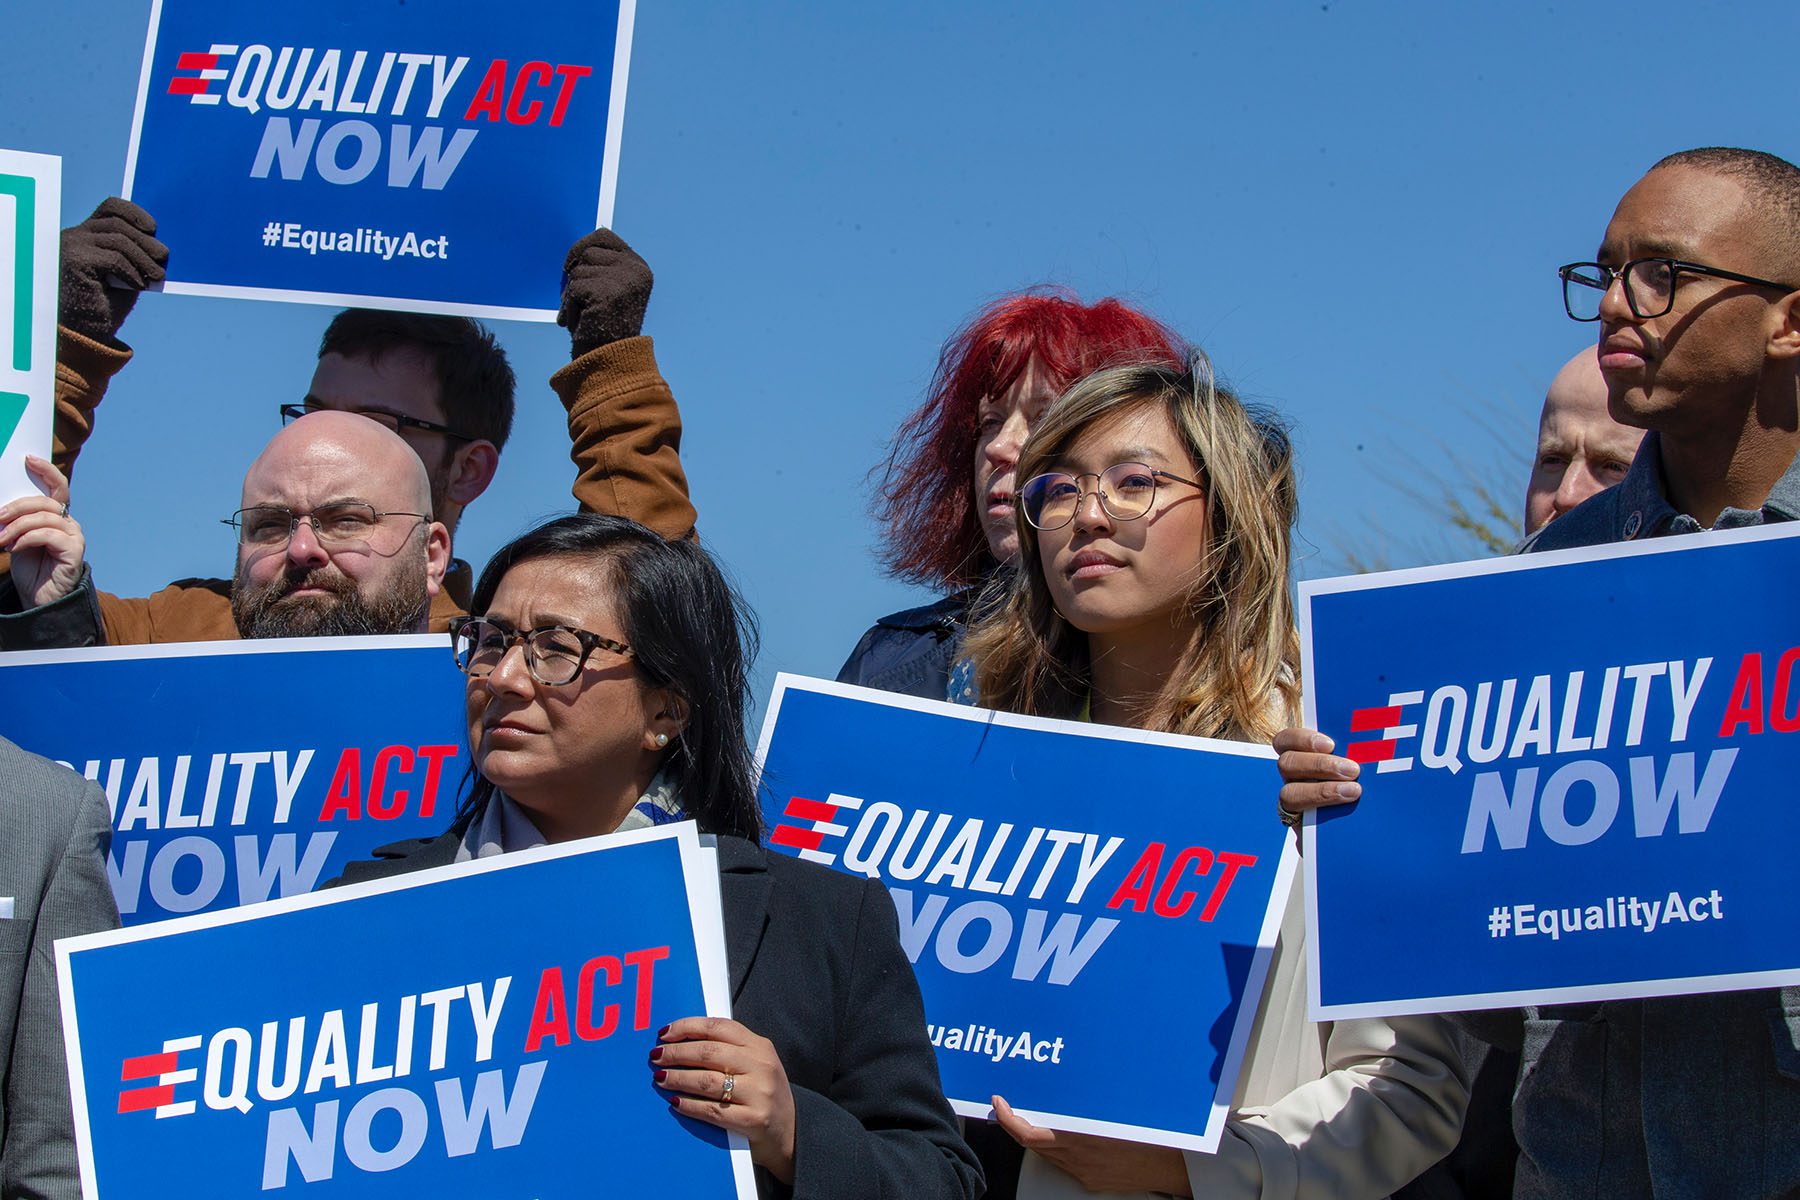 People holding signs that read "Equality Act Now" stand in support of the Equality Act on Capitol Hill.